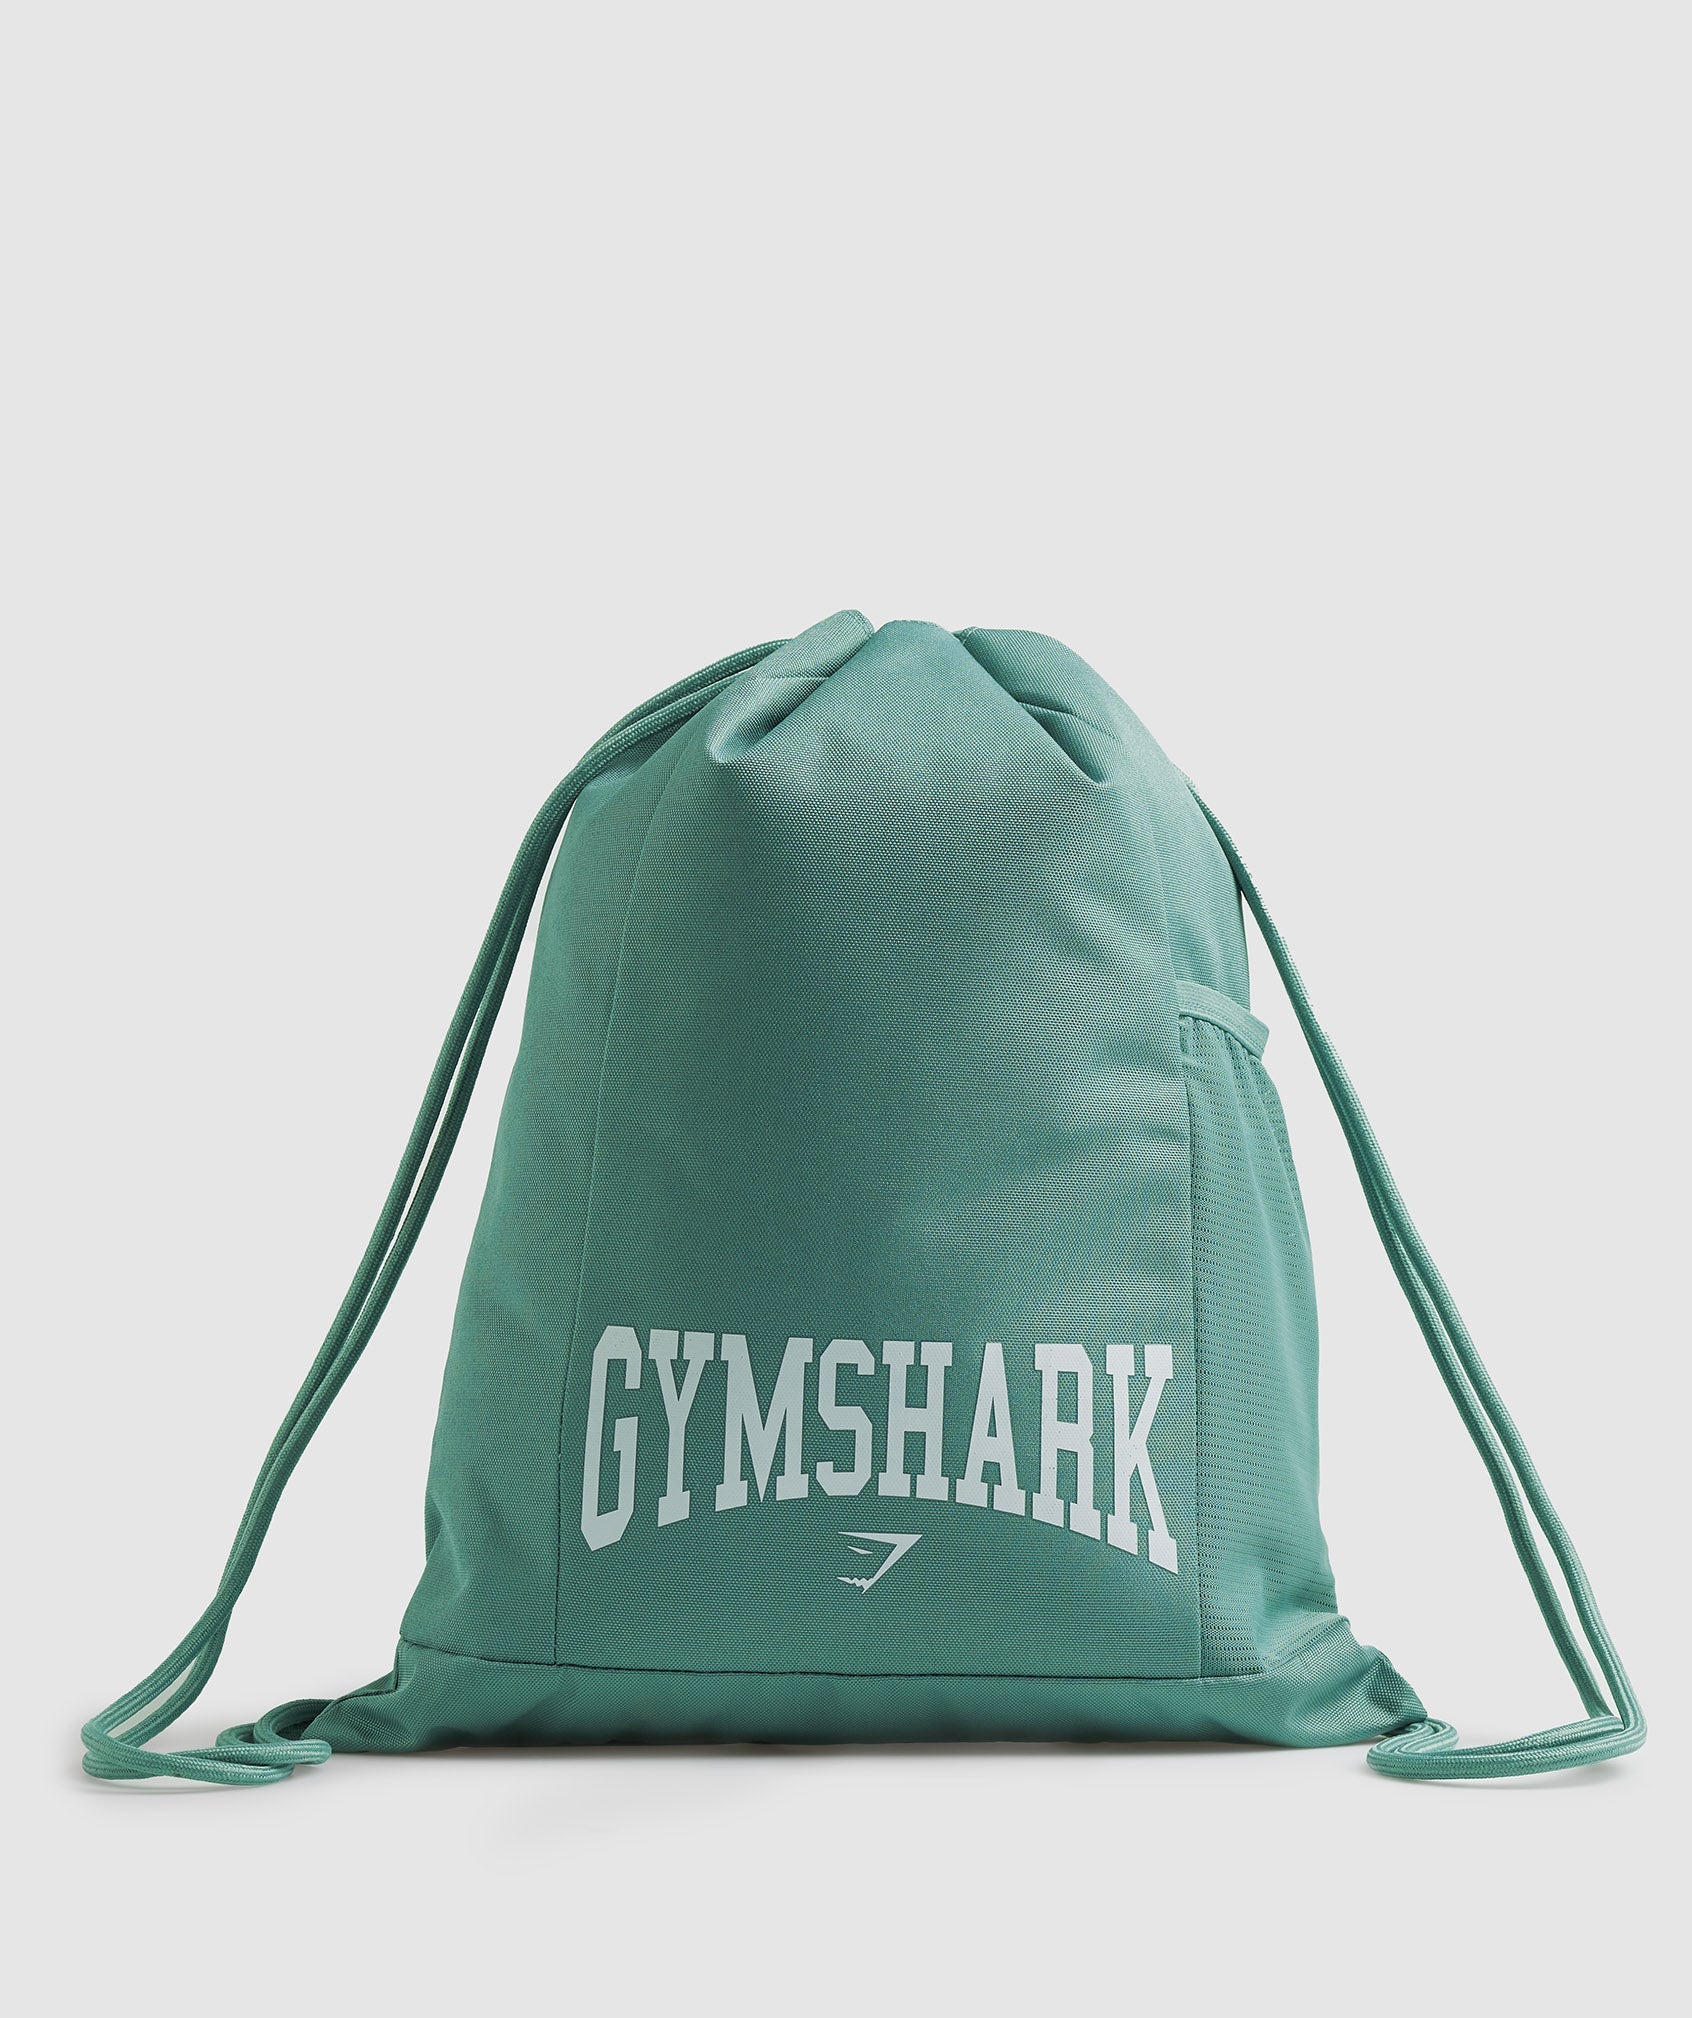 GFX Collegiate  Gymsack in Ink Teal - view 1